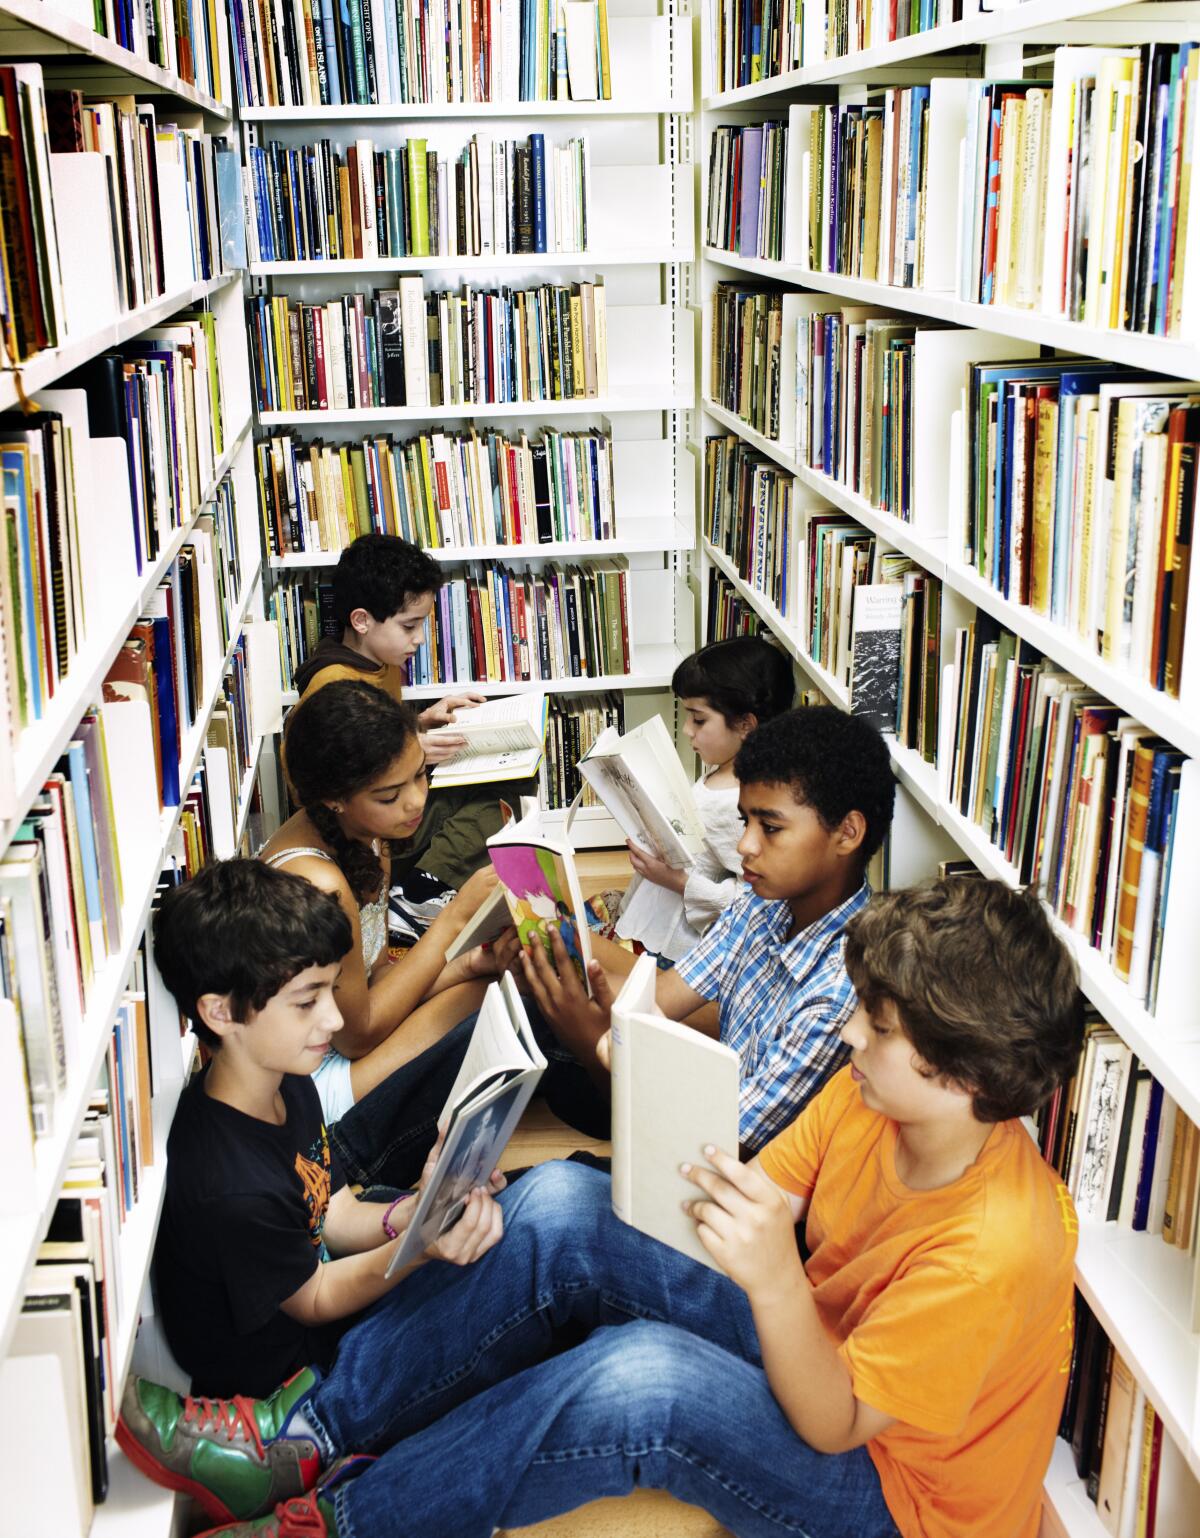 children reading on floor in library stack